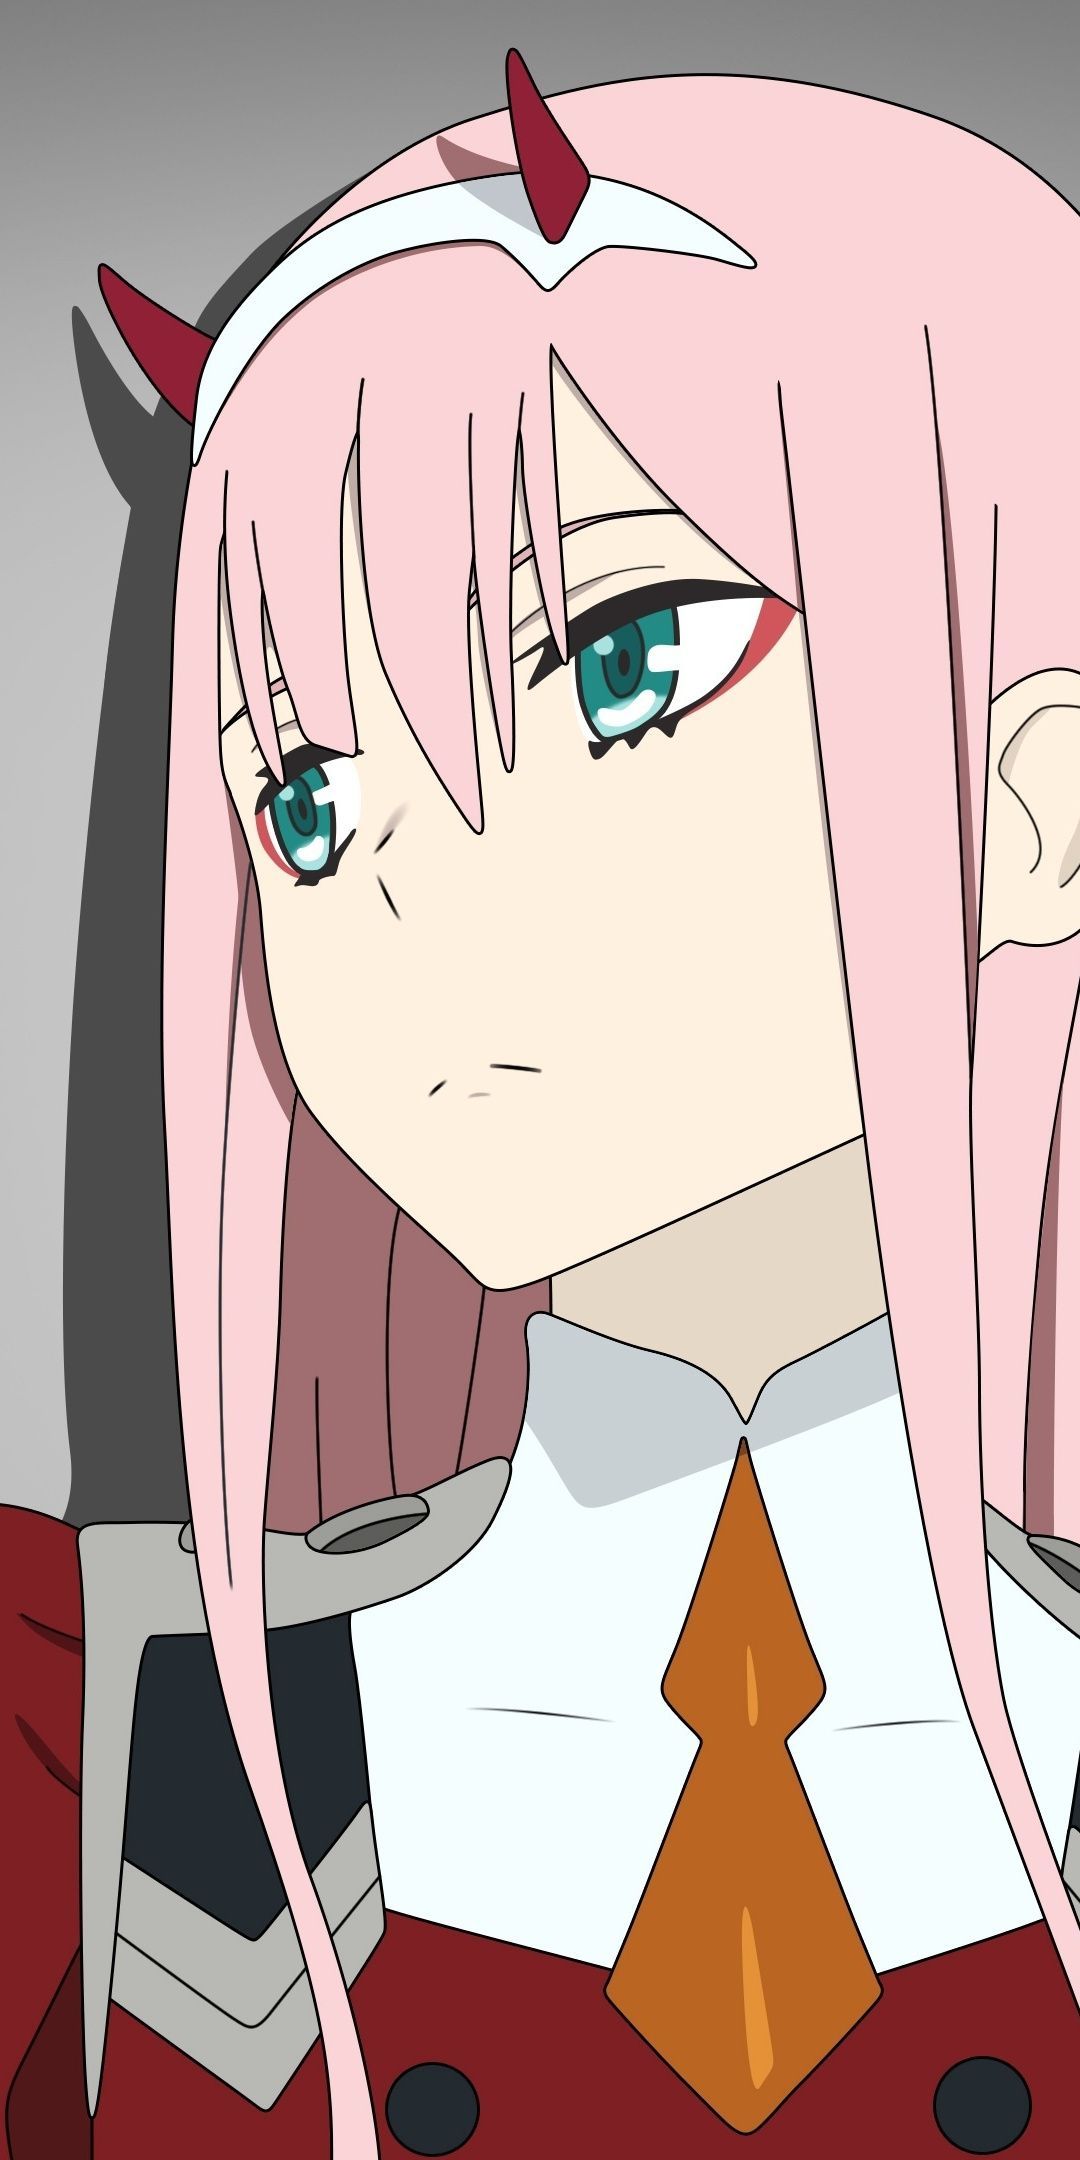 Download 1080x2160 wallpaper Curious, cute, zero two, looking away, Darling in the franxx, Honor 7X, Honor. Zero two, Darling in the franxx, Cute anime character